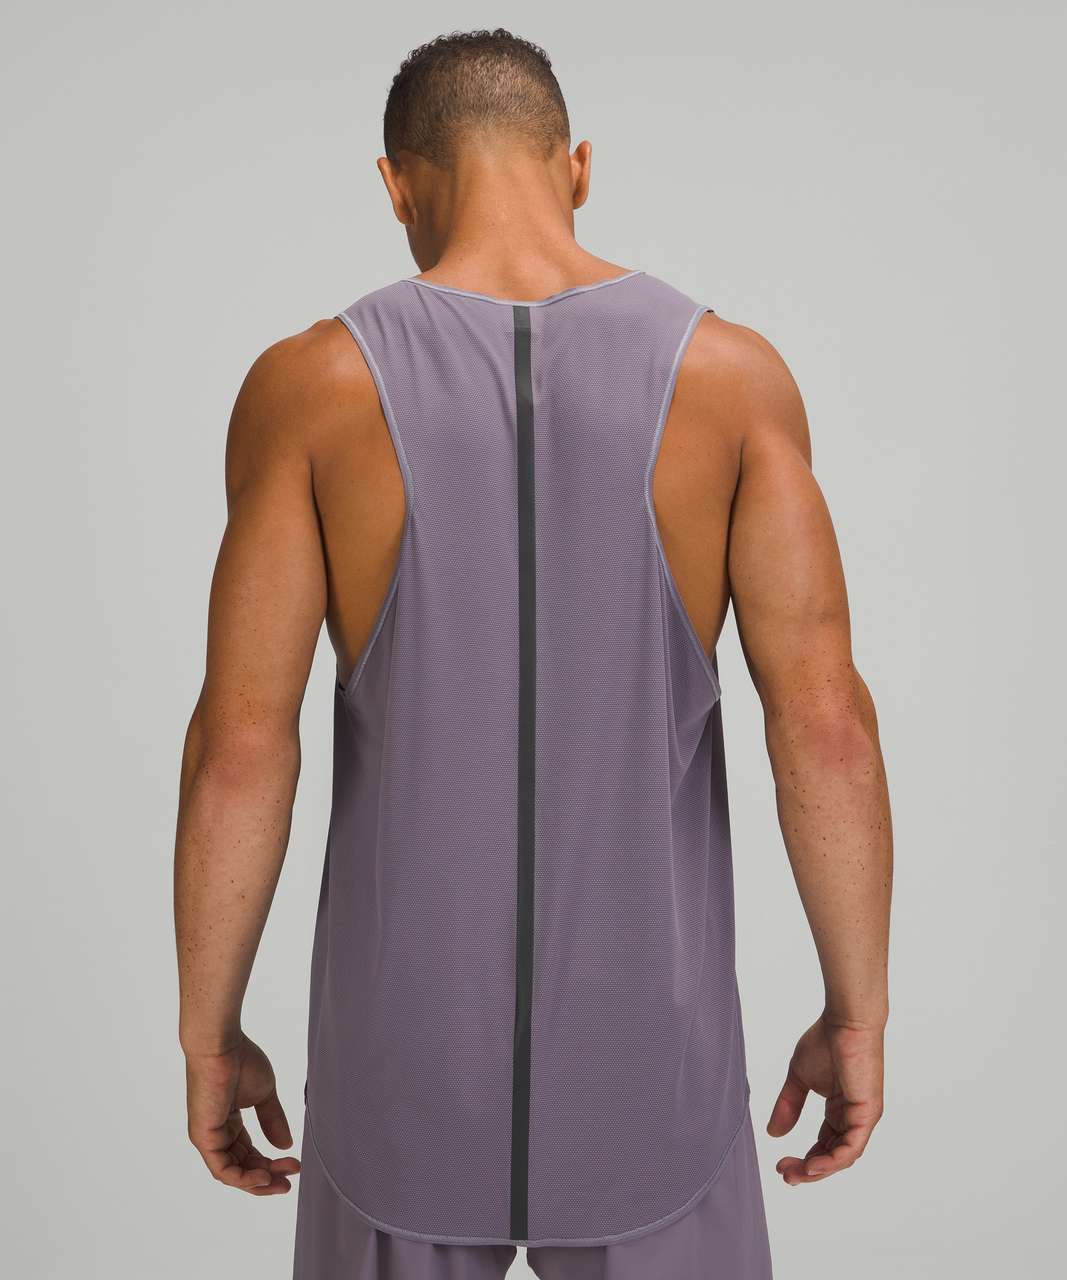 Seriously love this top! Hold Tight Tank in Dusky Lavender (8) and